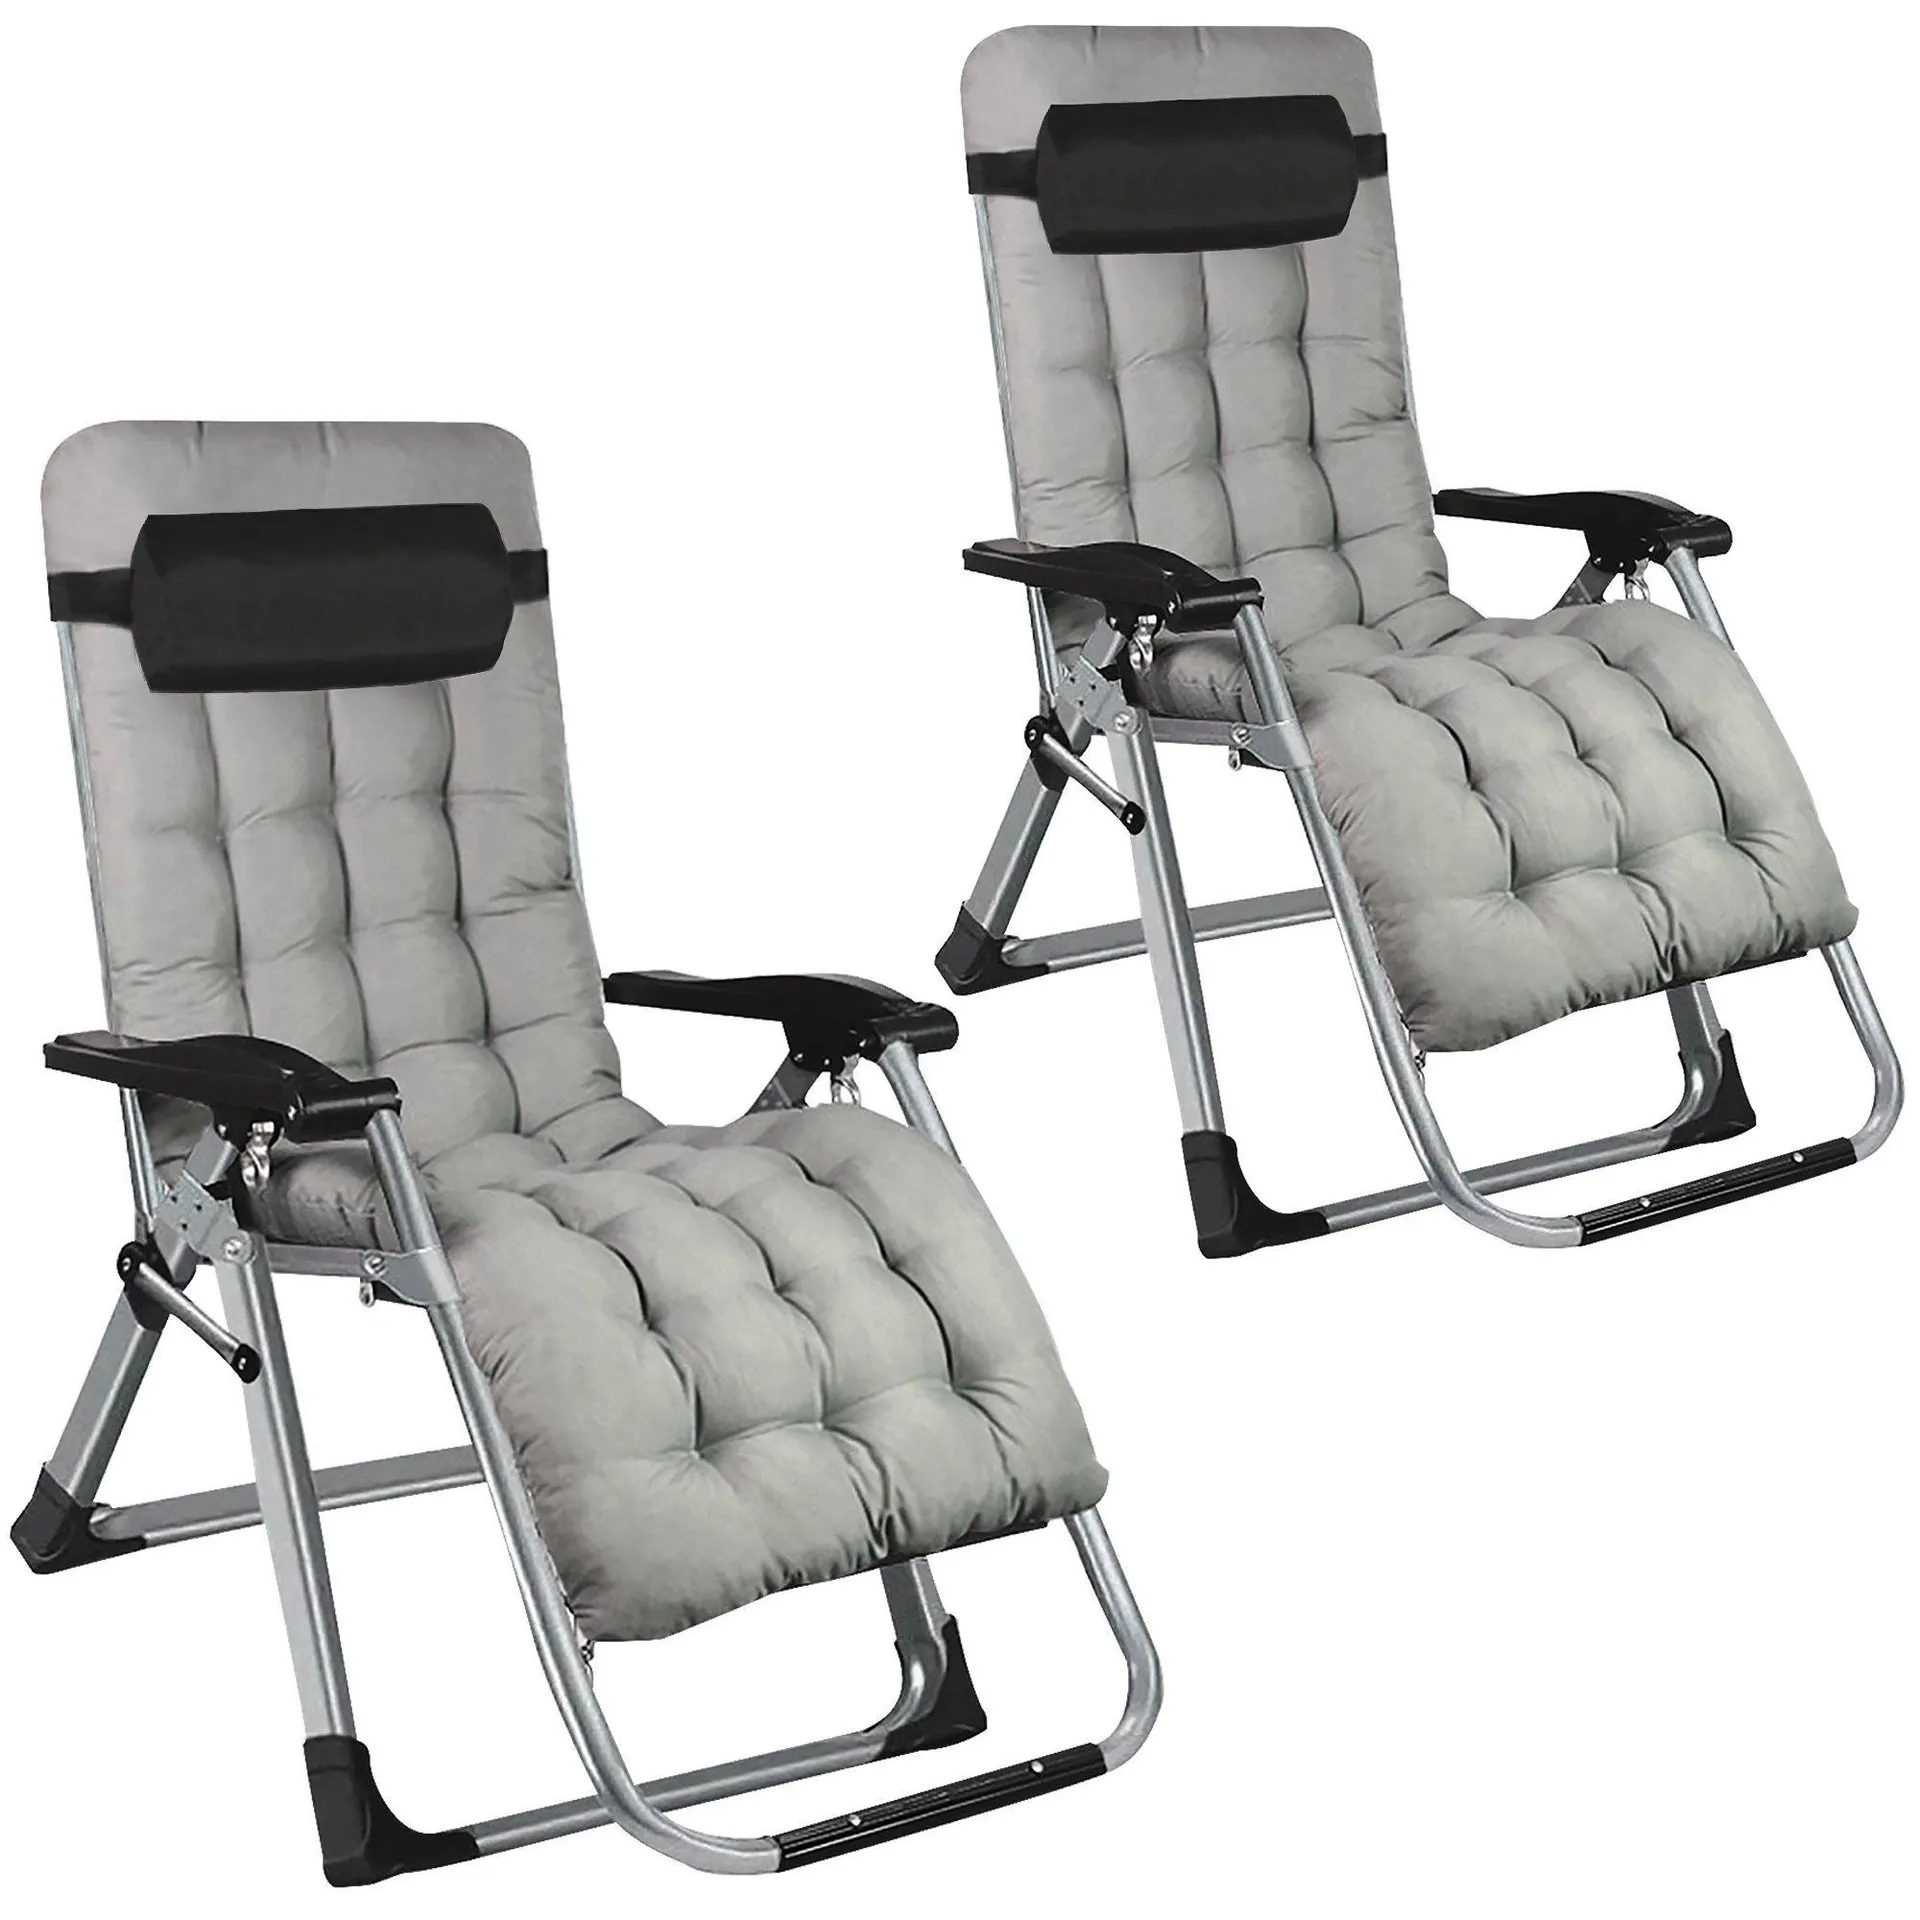 Folding Recliner Lounger Chair With Detachable Cushion - Set of 2